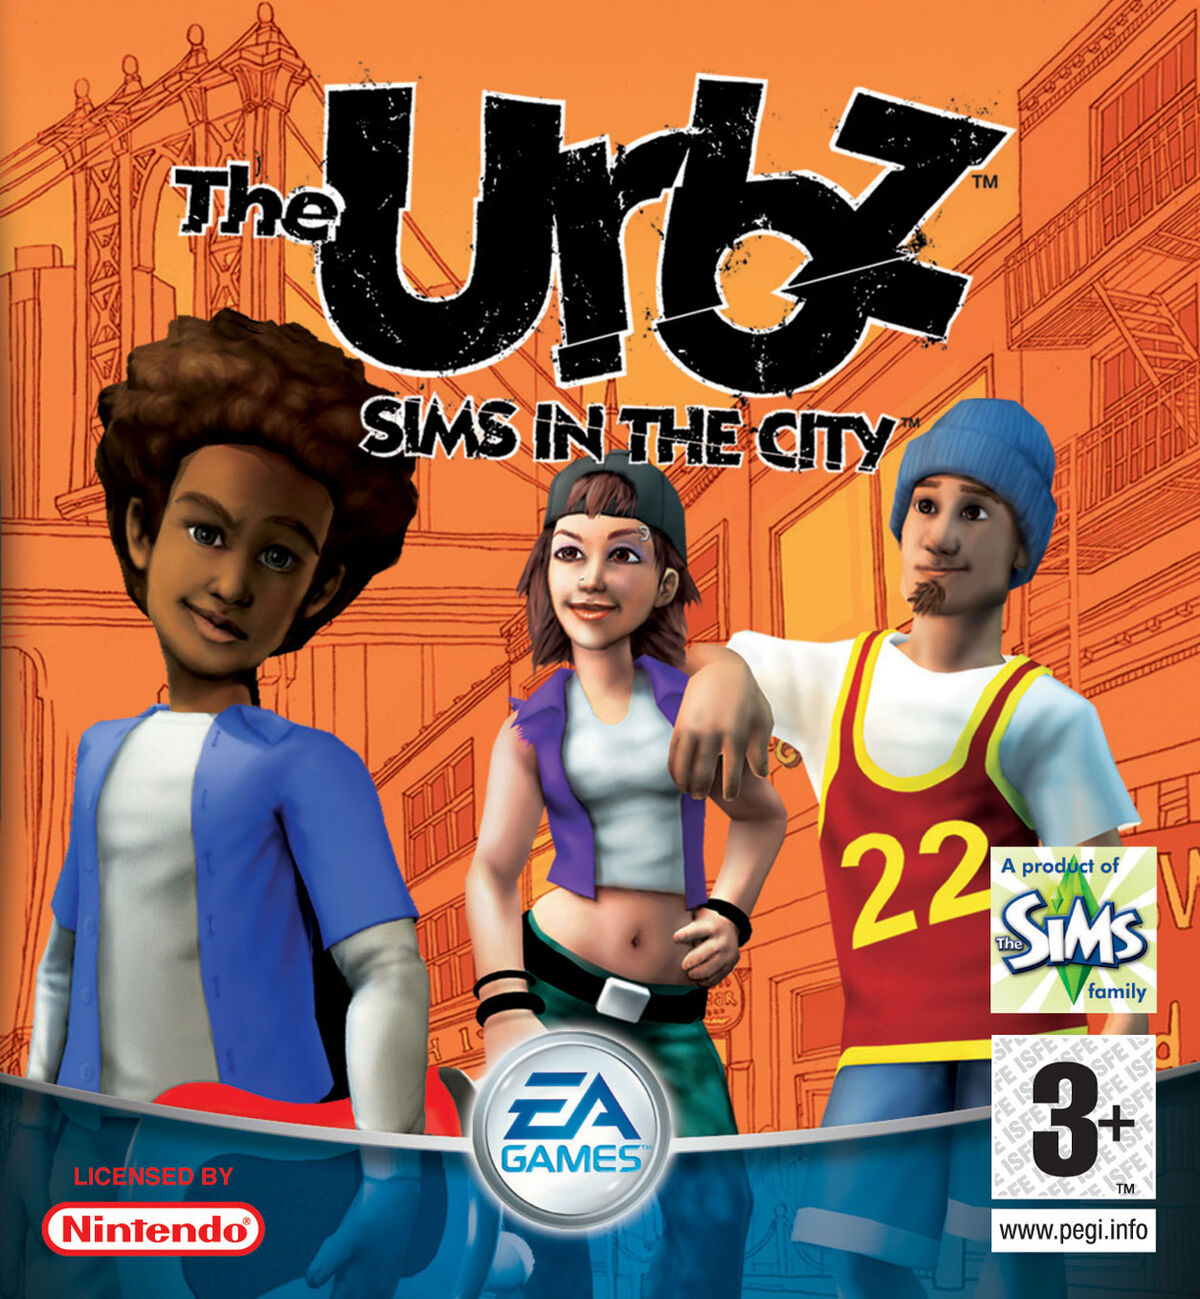 The Urbz: Sims in the City (handheld) | The Sims Wiki | Fandom